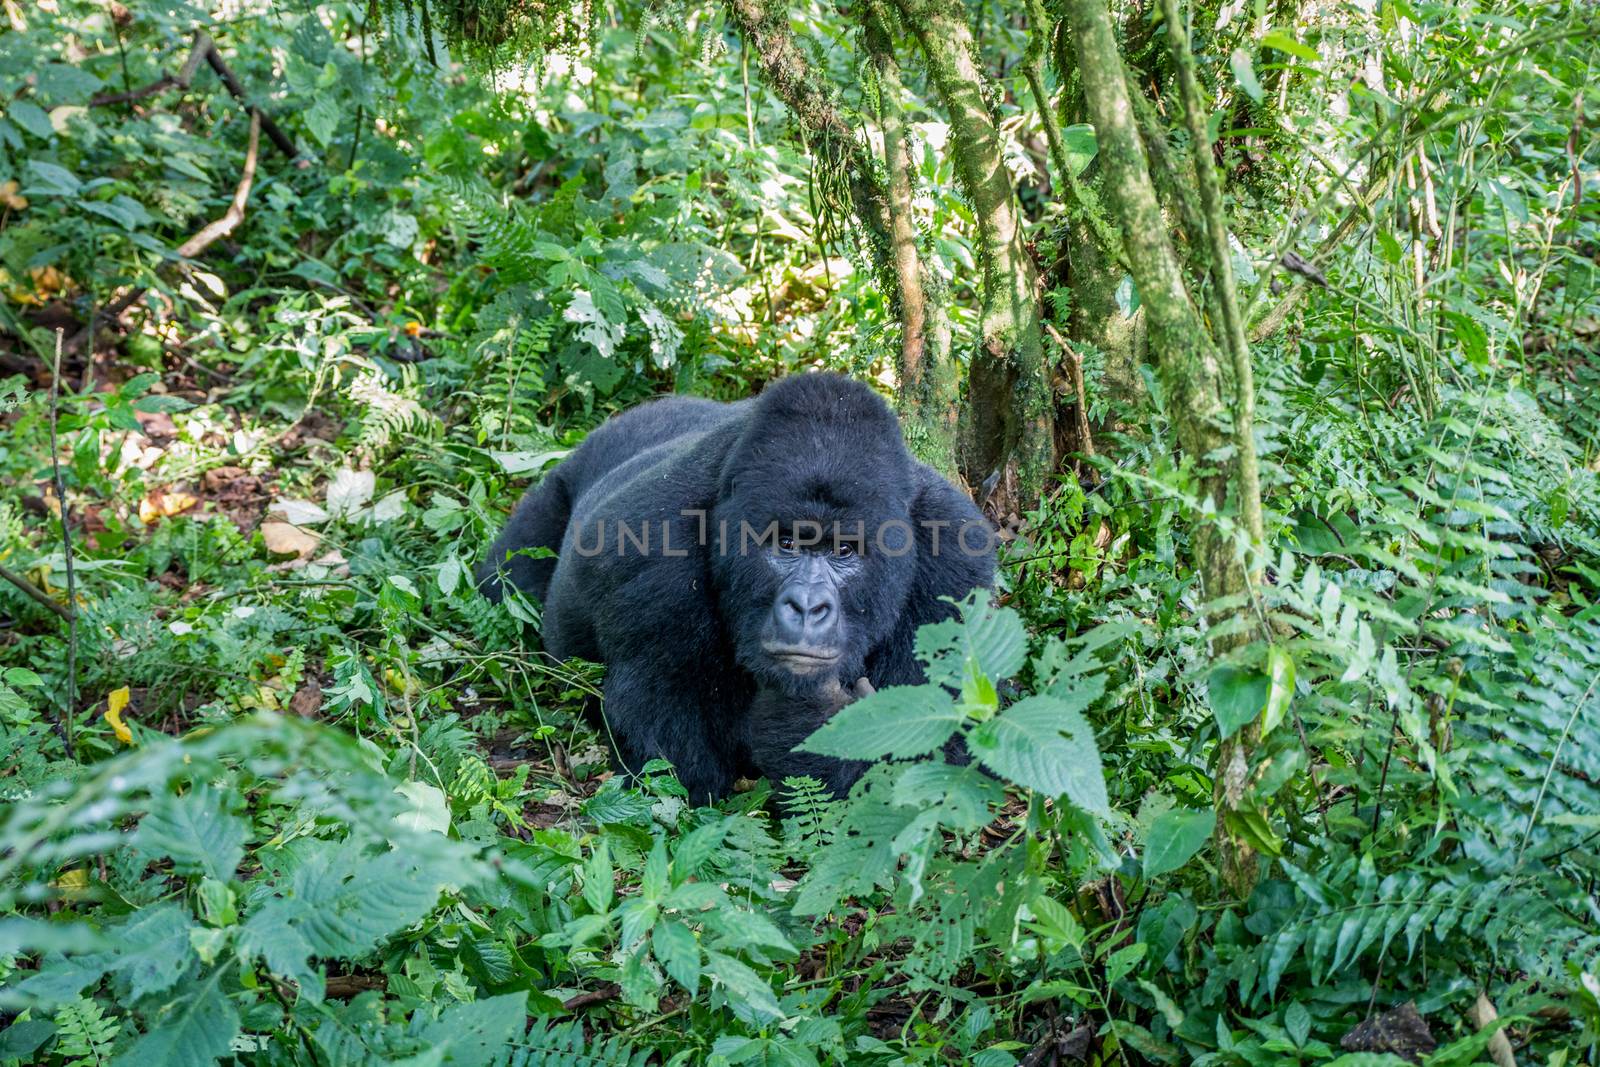 Silverback Mountain gorilla laying on the ground in the Virunga National Park, Democratic Republic Of Congo.